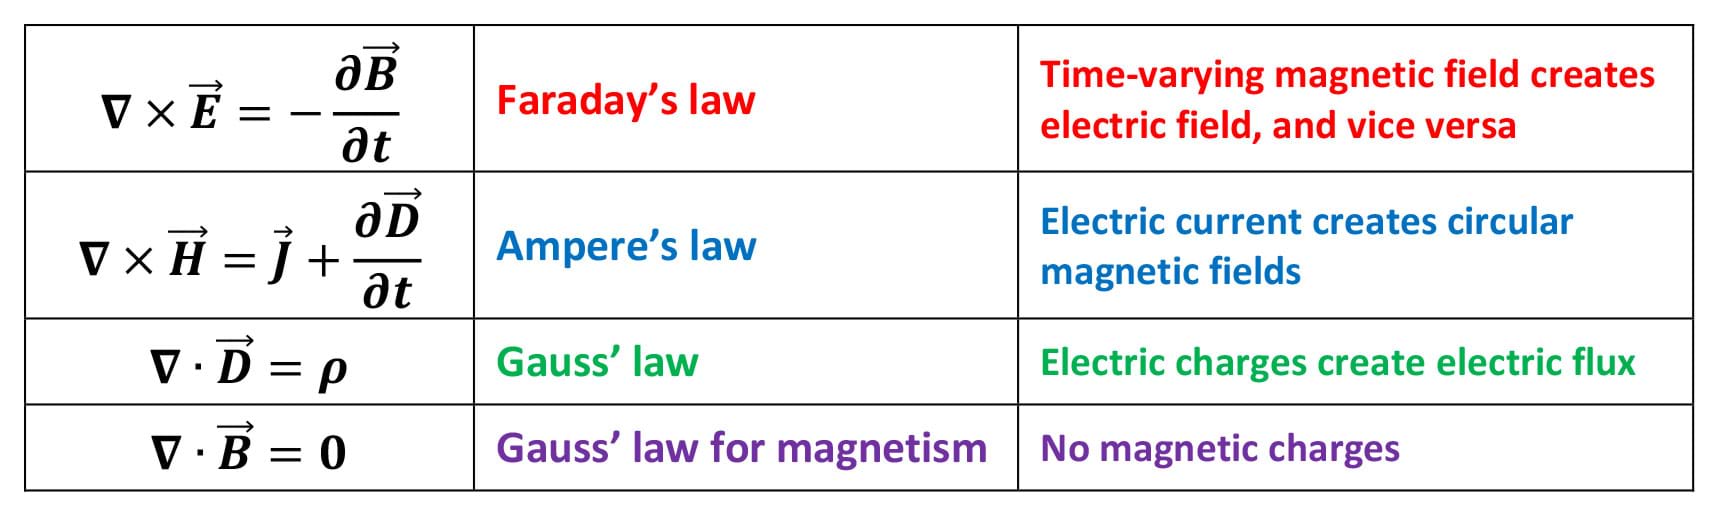 A table provides four equations: 1) Faraday’s law: Time varying magnetic field creates electric field, and vice versa; 2) Ampere’s law: Electric current creates circular magnetic fields; 3) Gauss’ law: Electric charges create electric flux; and 4) Gauss’ law for magnetism: no magnetic charges. The equations: Del cross vector E = negative partial derivative of vector B with respect to time, Del cross vector H = vector J plus the partial derivative of vector D with respect to time, Del dot vector D = rho, Del dot vector H = 0, respectively.